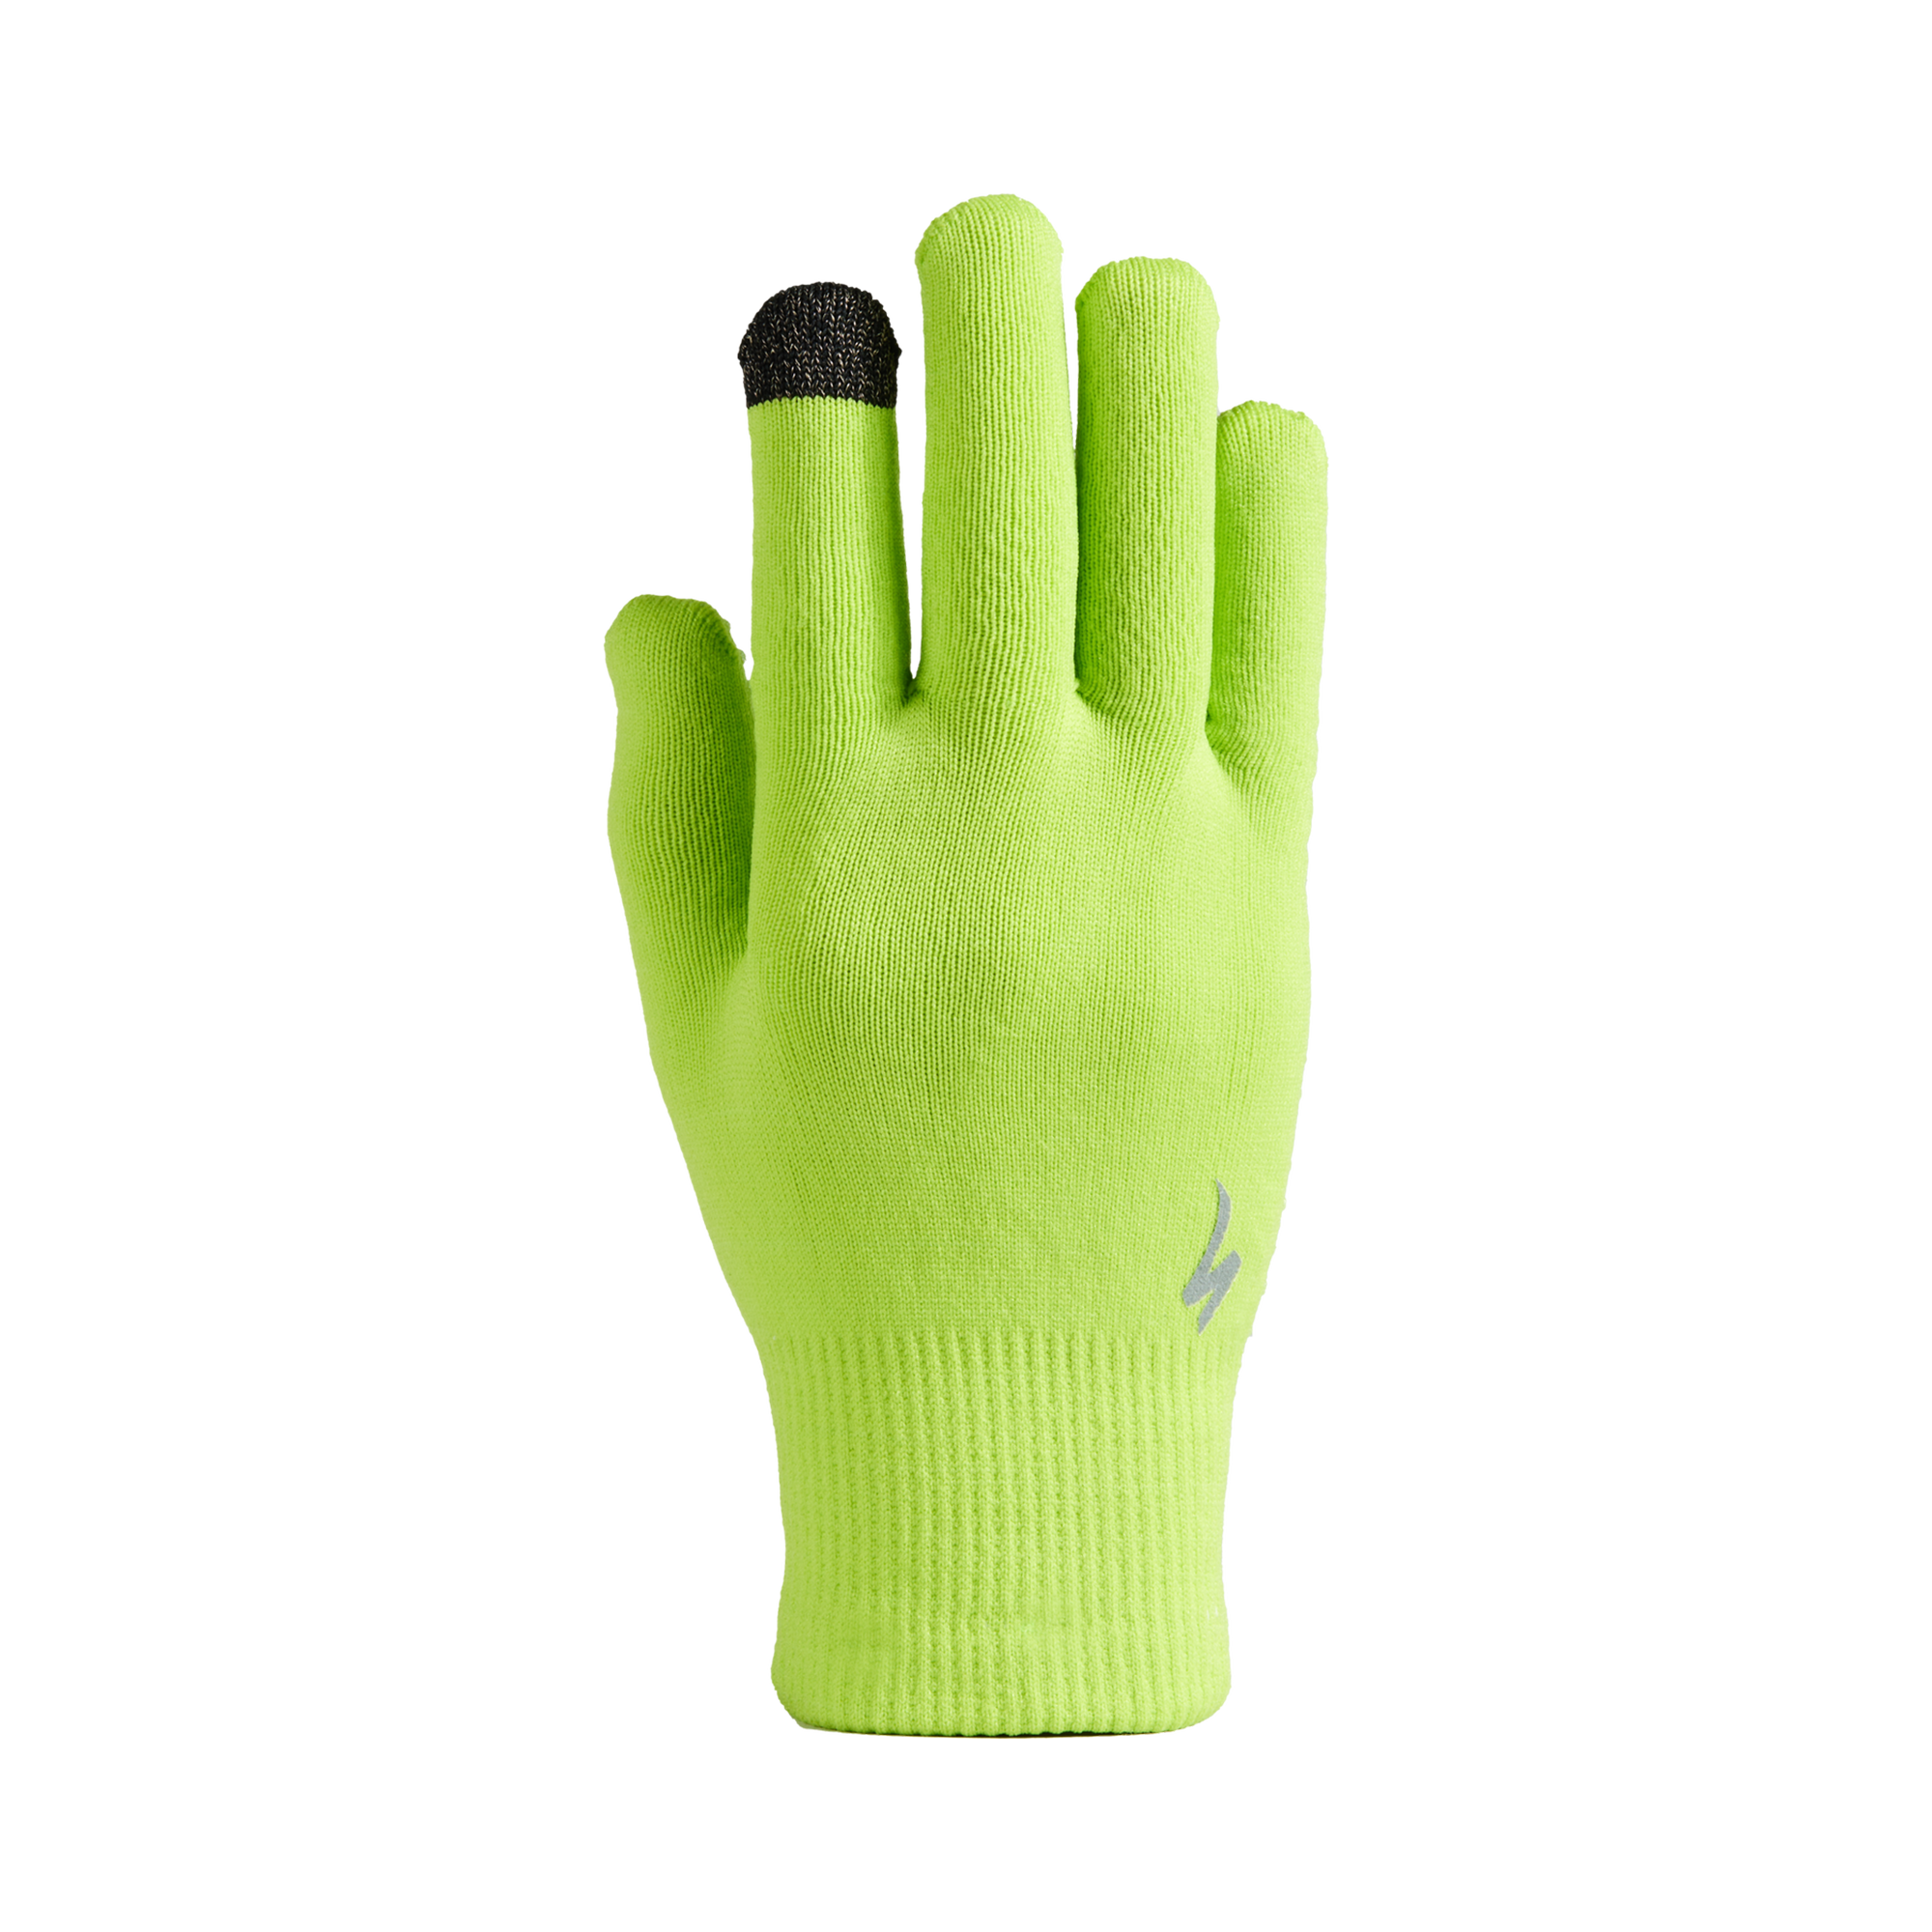 Thermal Knit Gloves